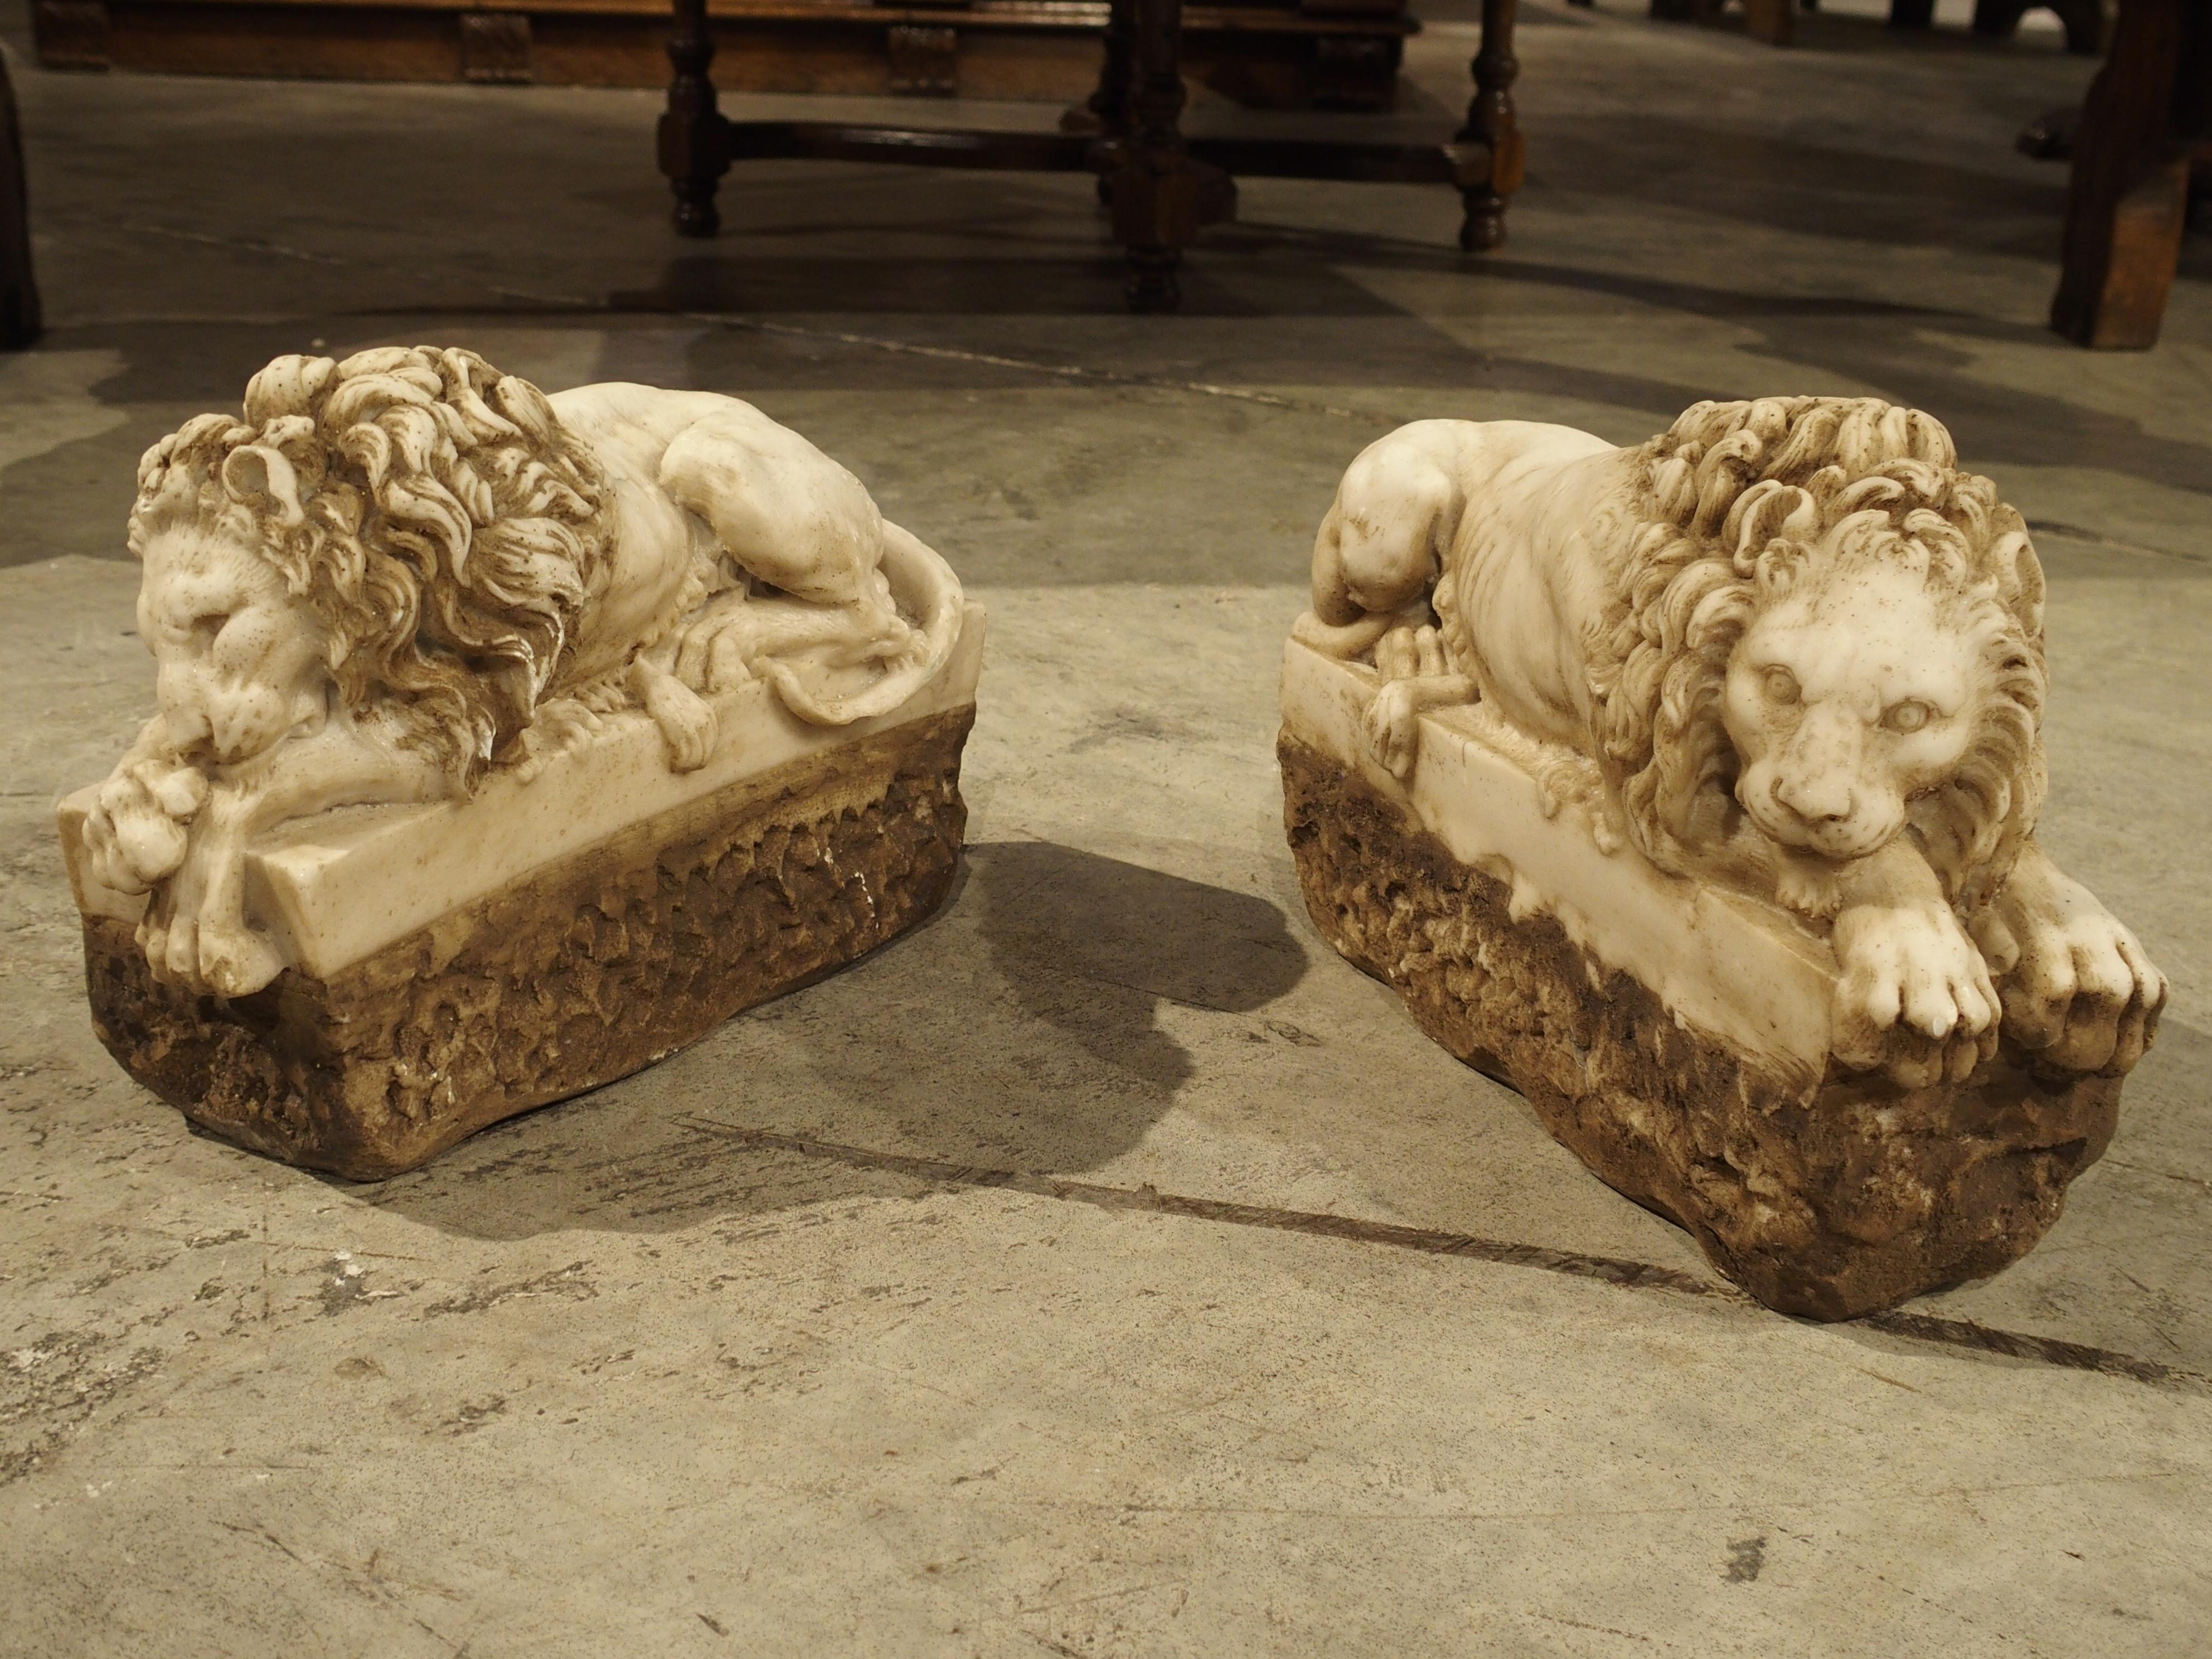 Antonio Canova (1757-1822), the renowned Italian artist, created the originals of these lions as a part of the monumental tomb for Clement XIII, in 1792 at St. Peter’s Basilica in Rome. By the early 1800s, Canova became the most celebrated artist in